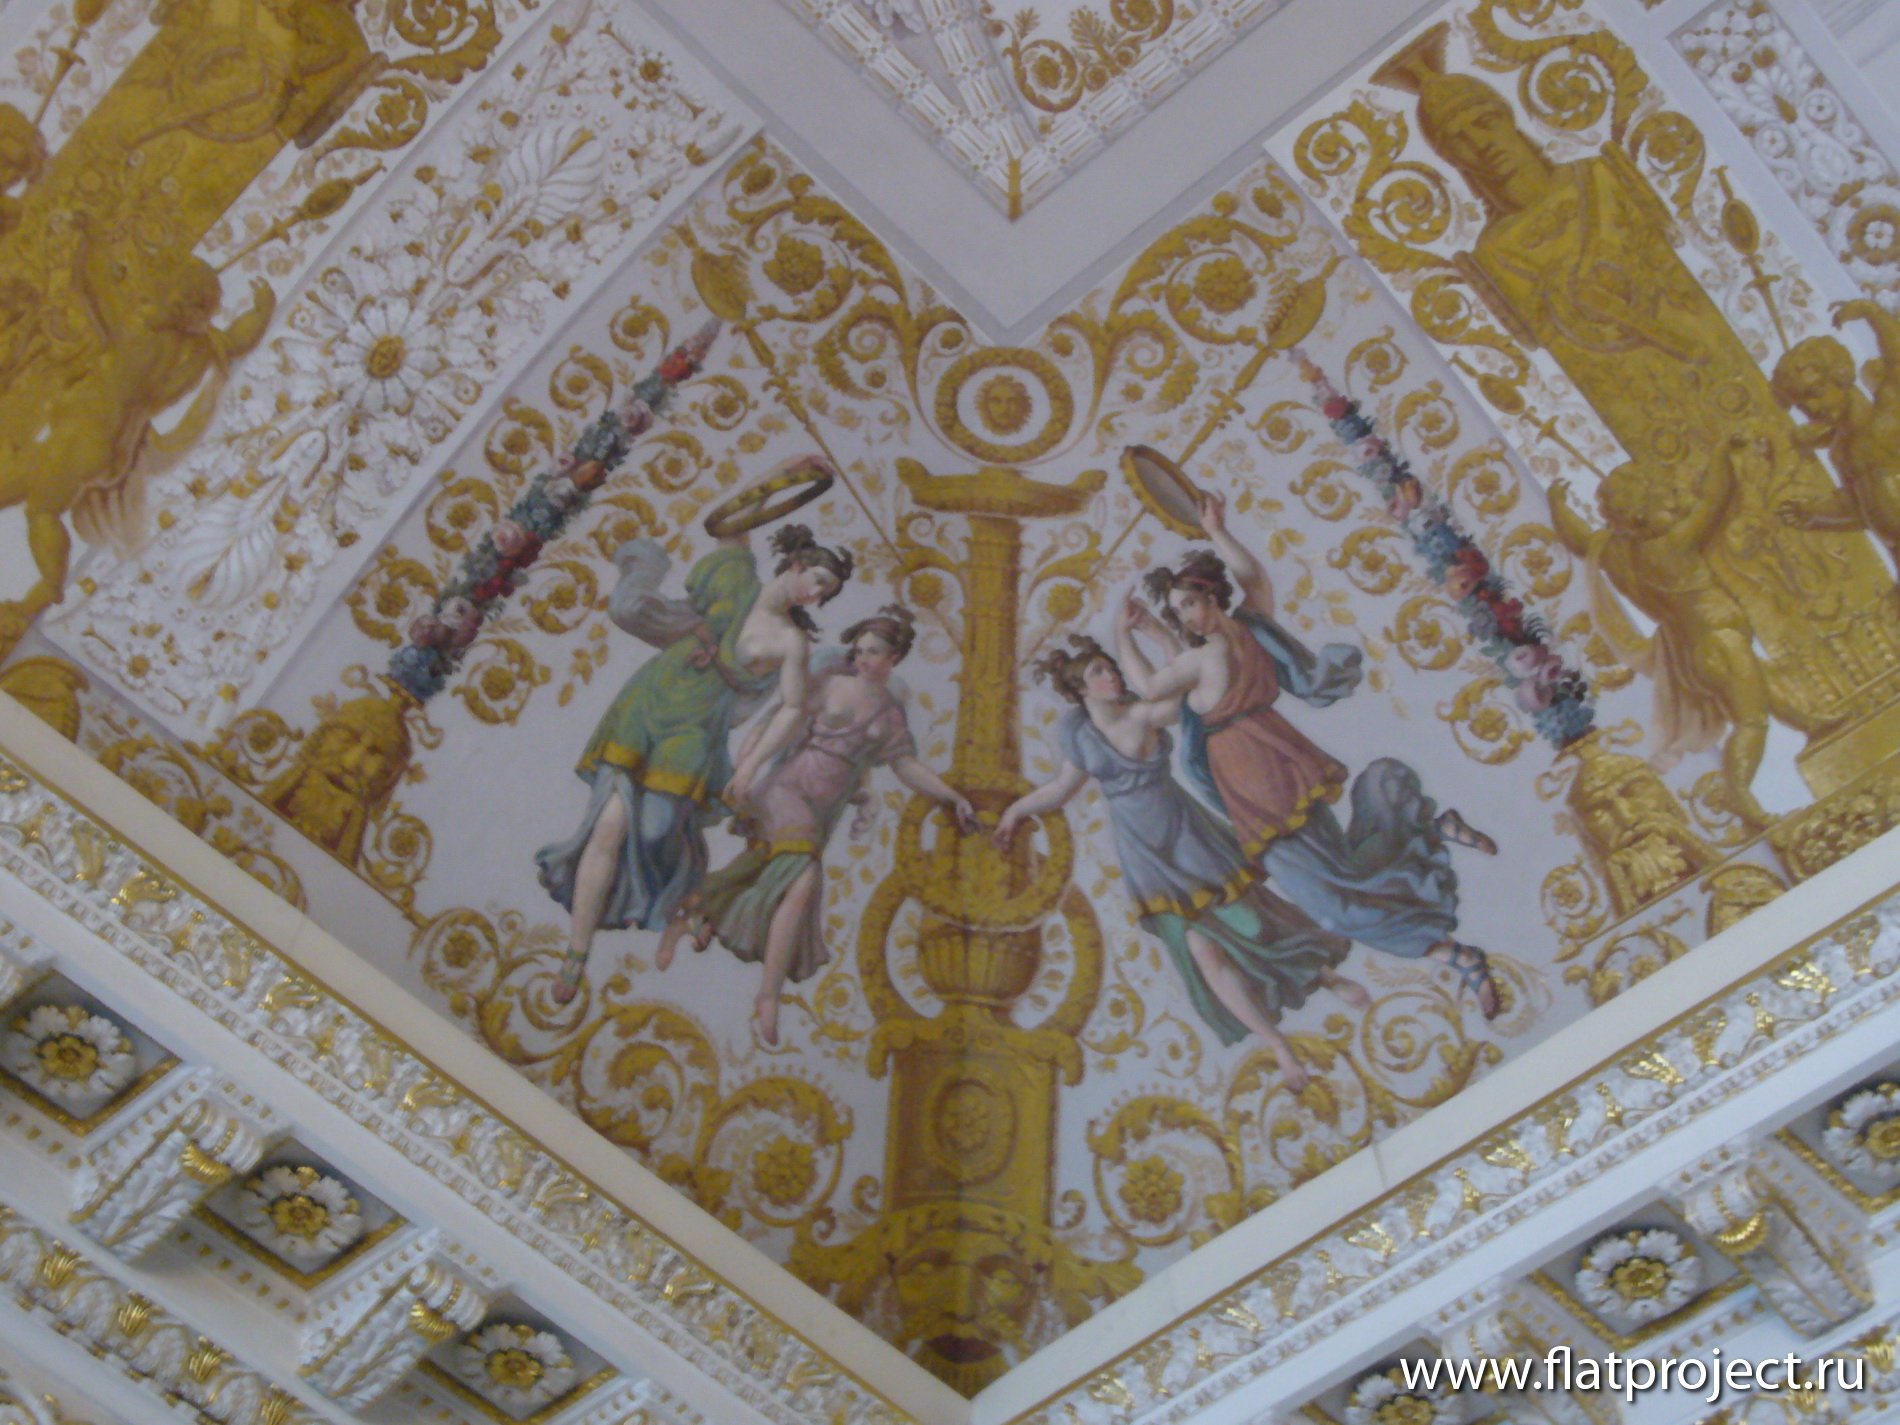 The State Russian museum interiors – photo 11